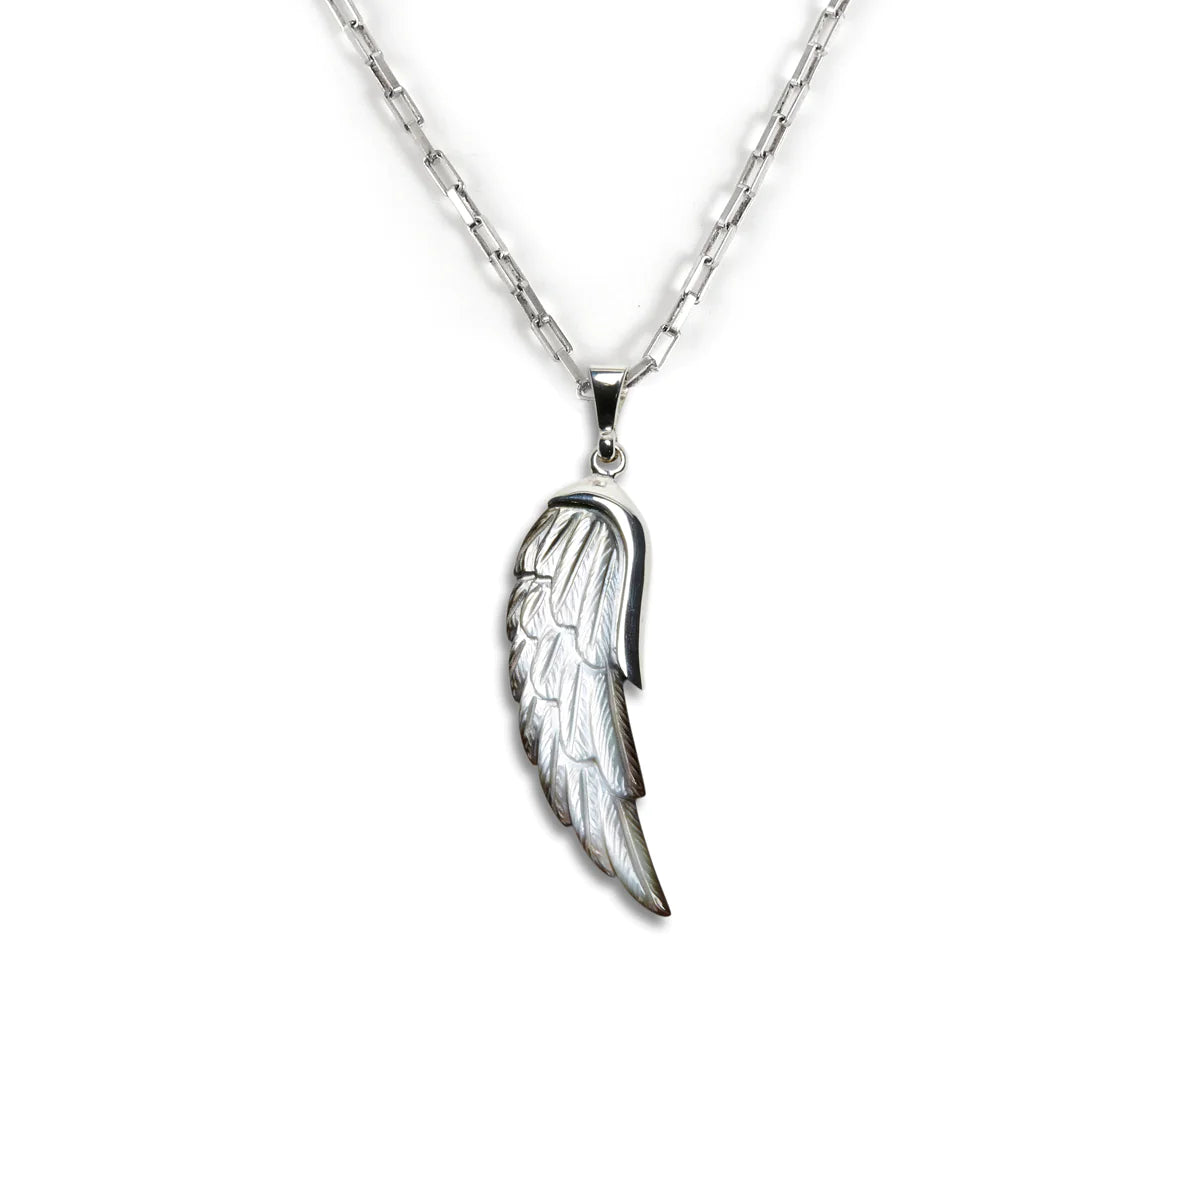 Nick Von K Angel Wing Charm carved from Mother of Pearl